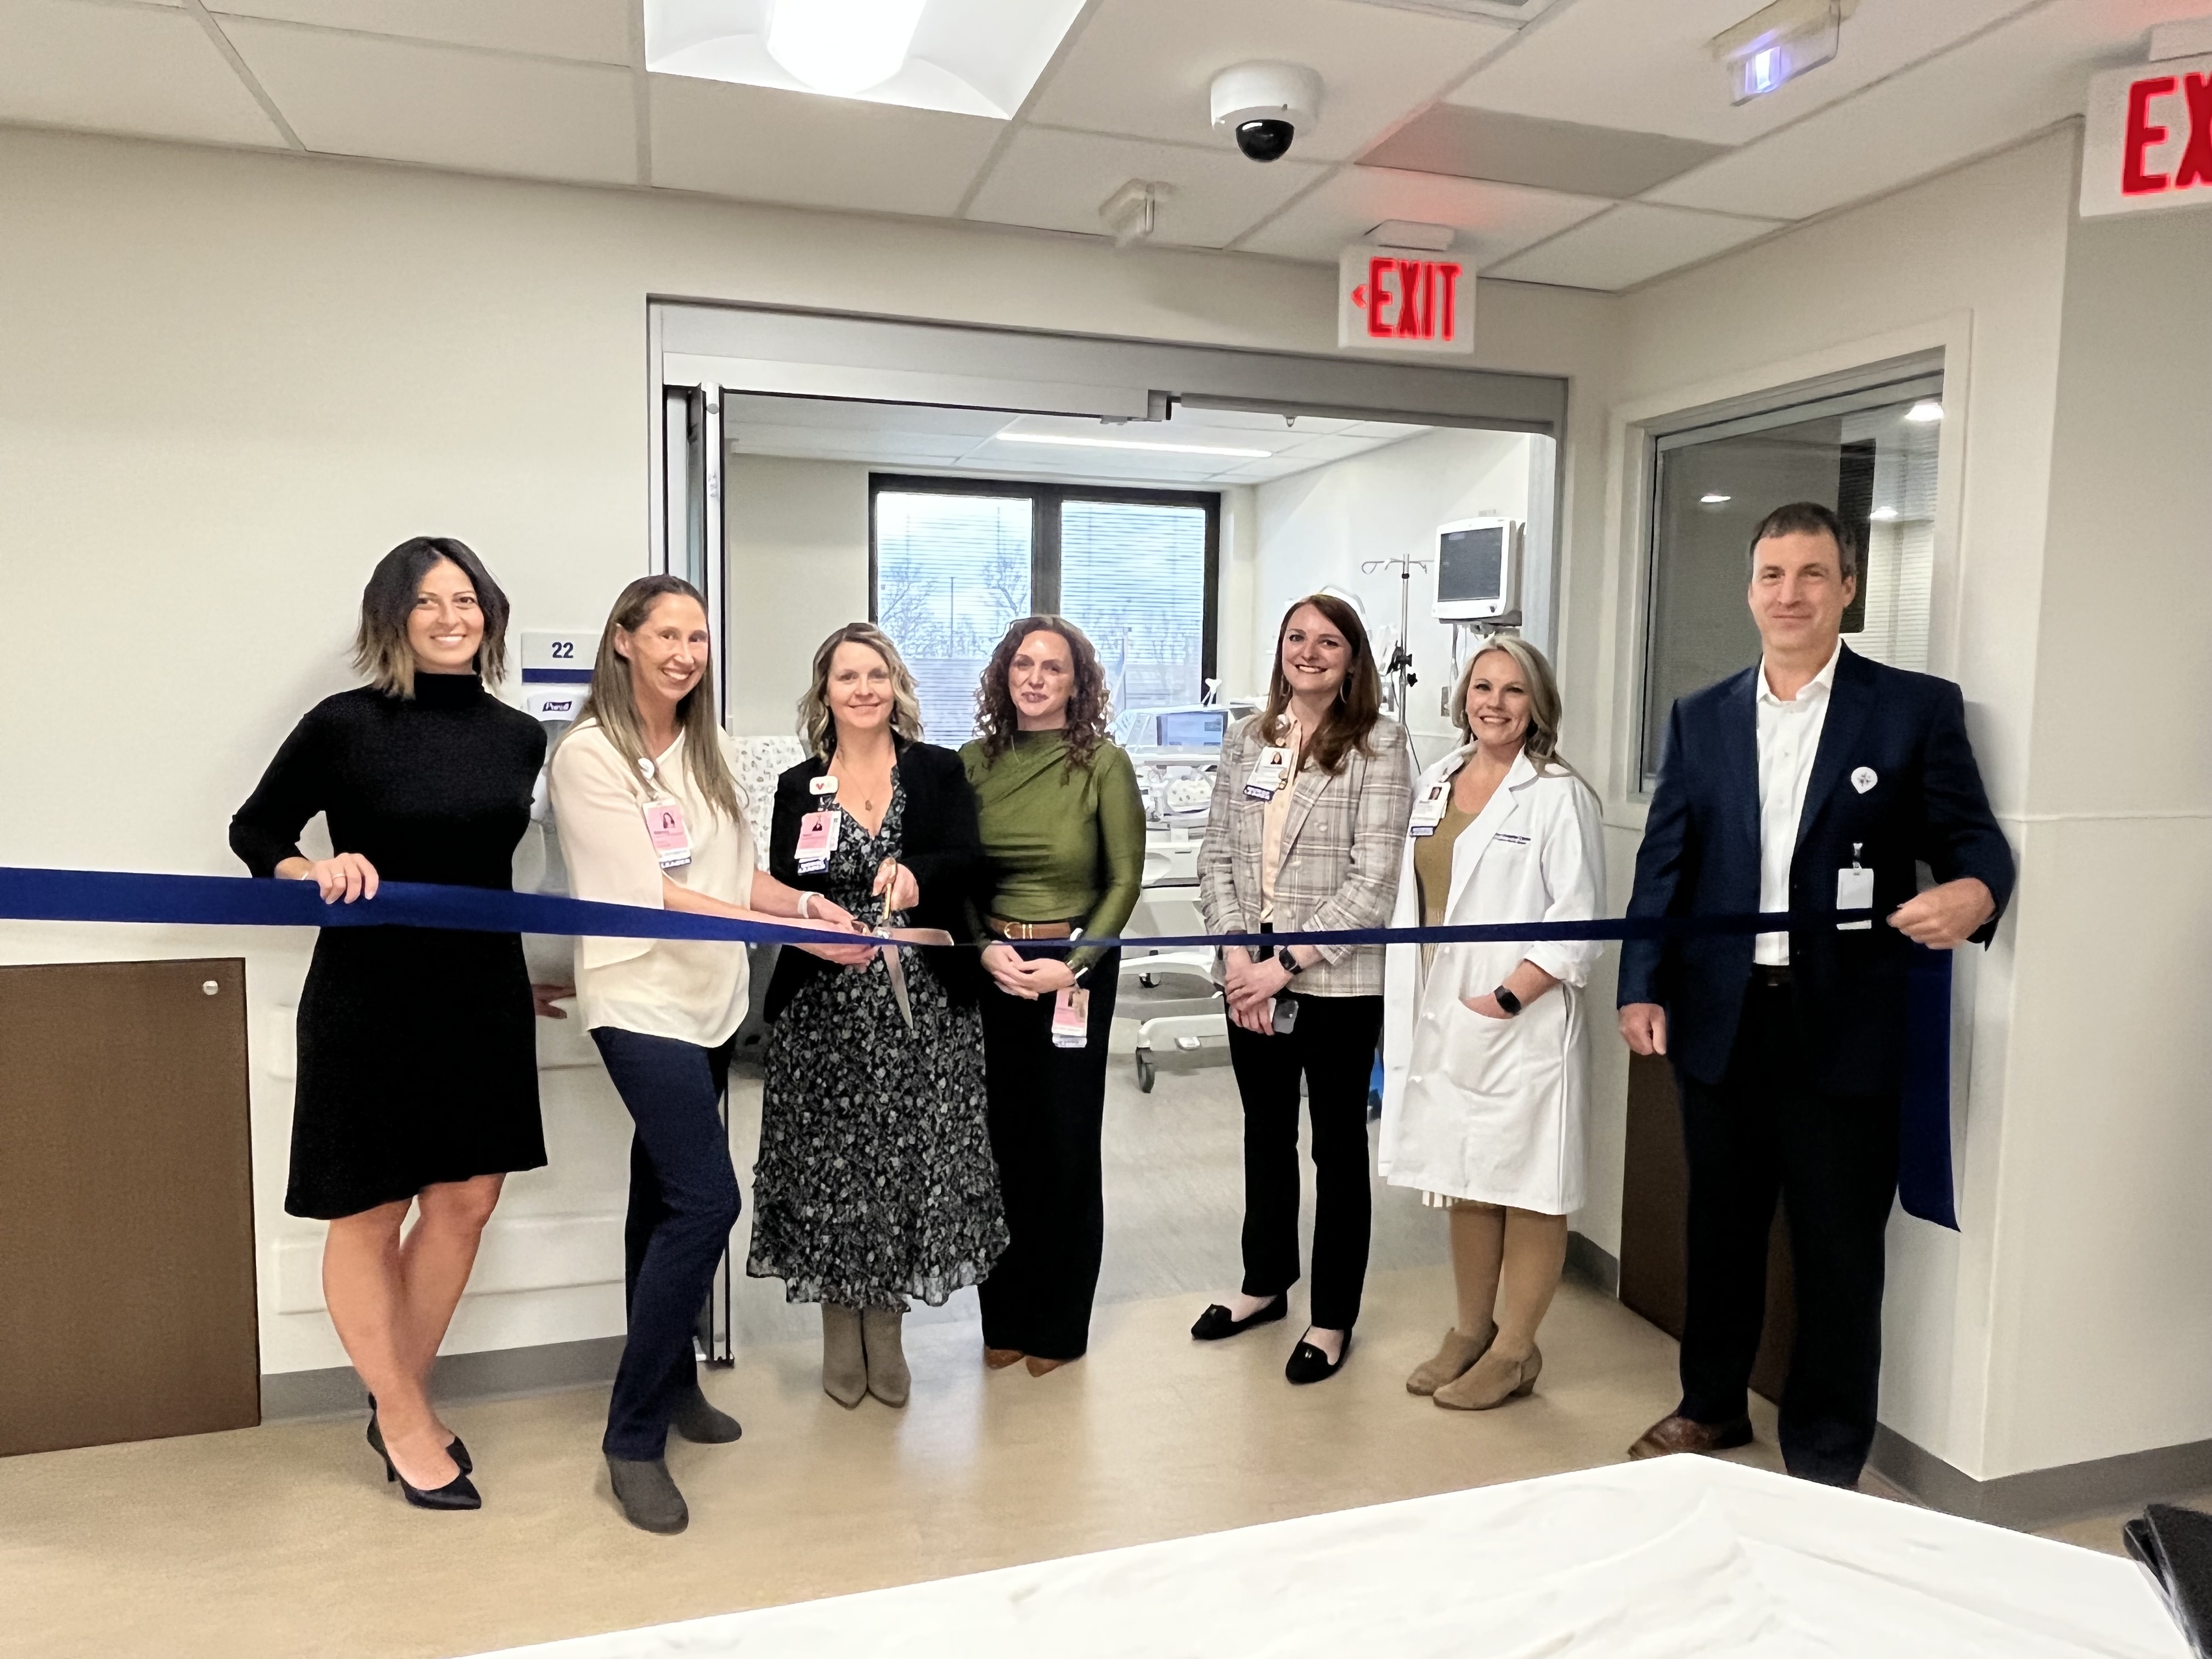 Reston Hospital leadership cut the ribbon to open the expanded Level III NICU